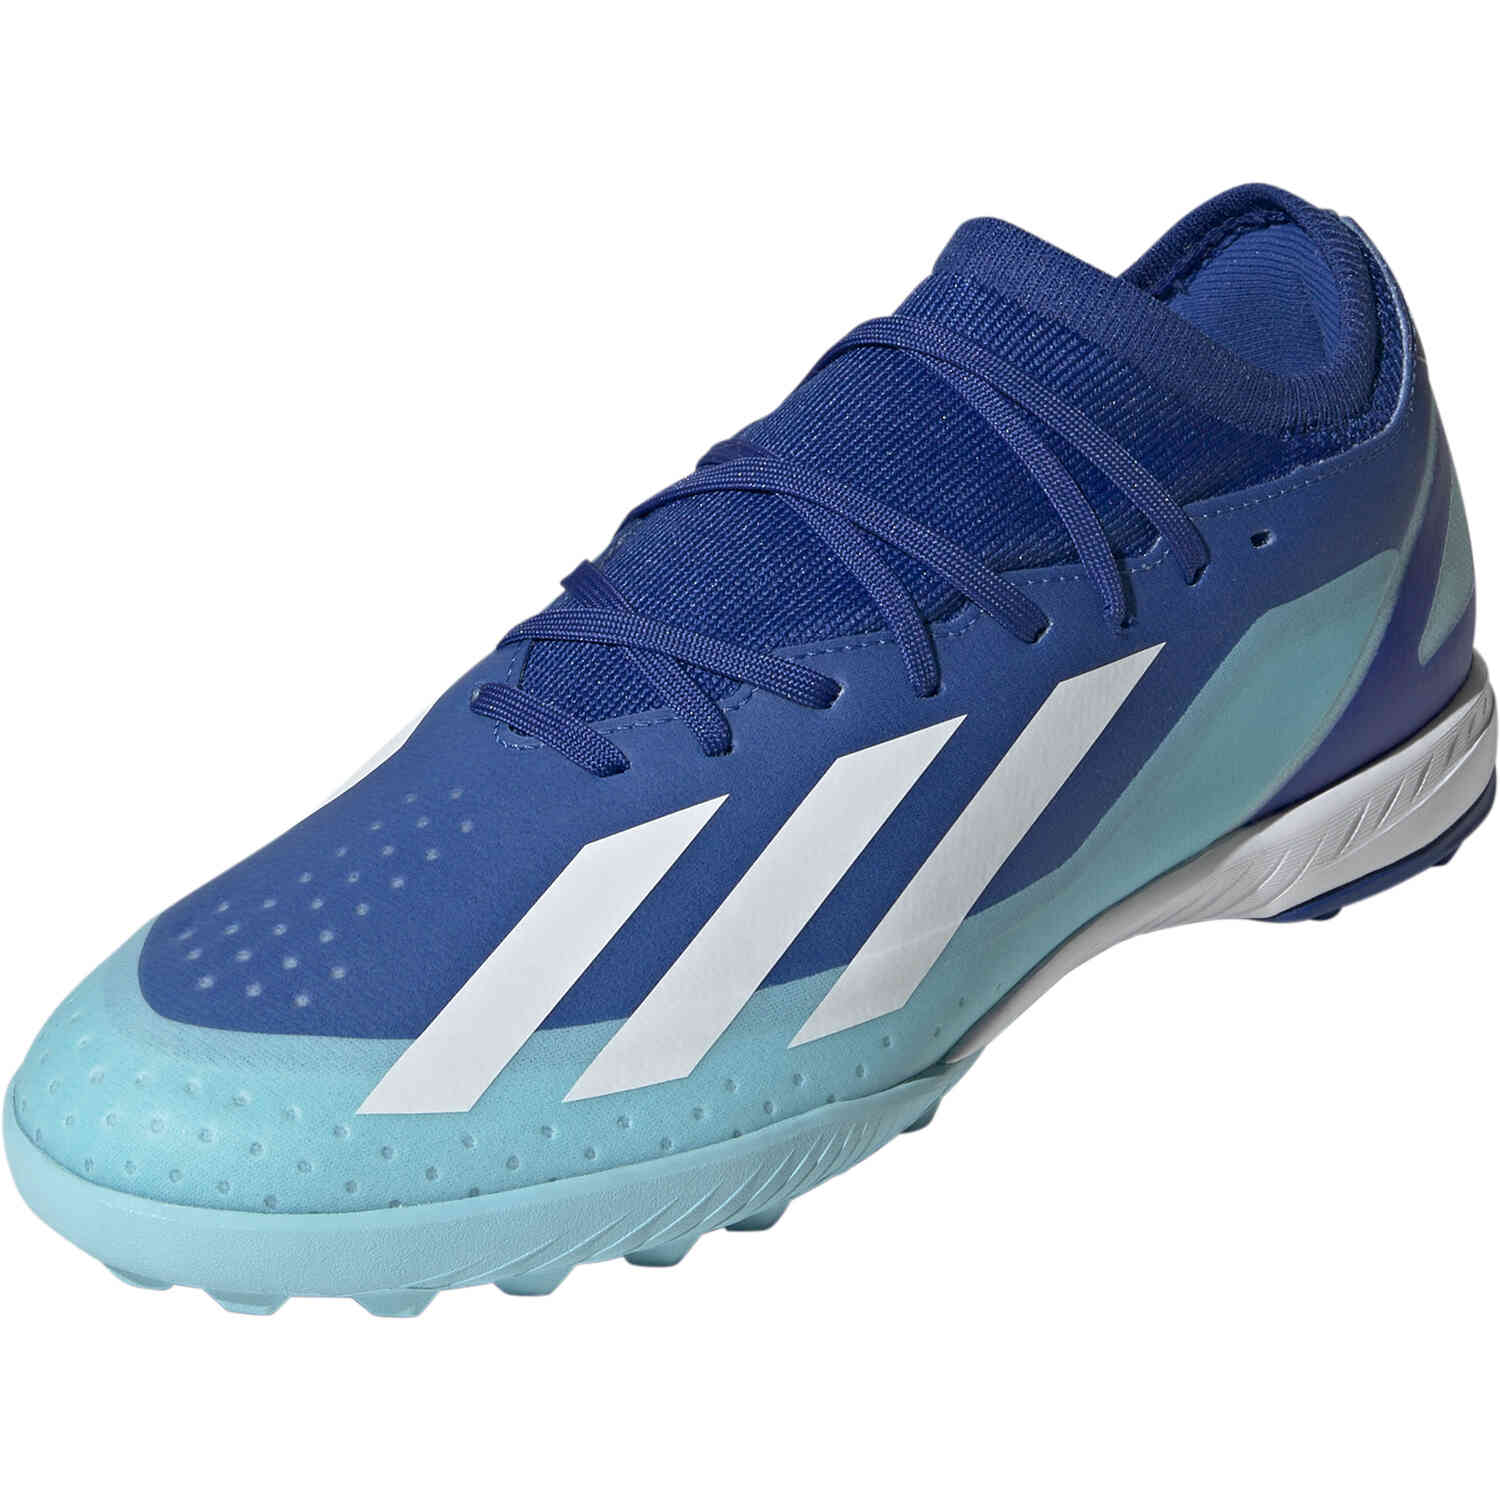 adidas X Crazyfast.3 TF Turf Soccer Shoes - Bright Royal, White & Solar Red  - Soccer Master